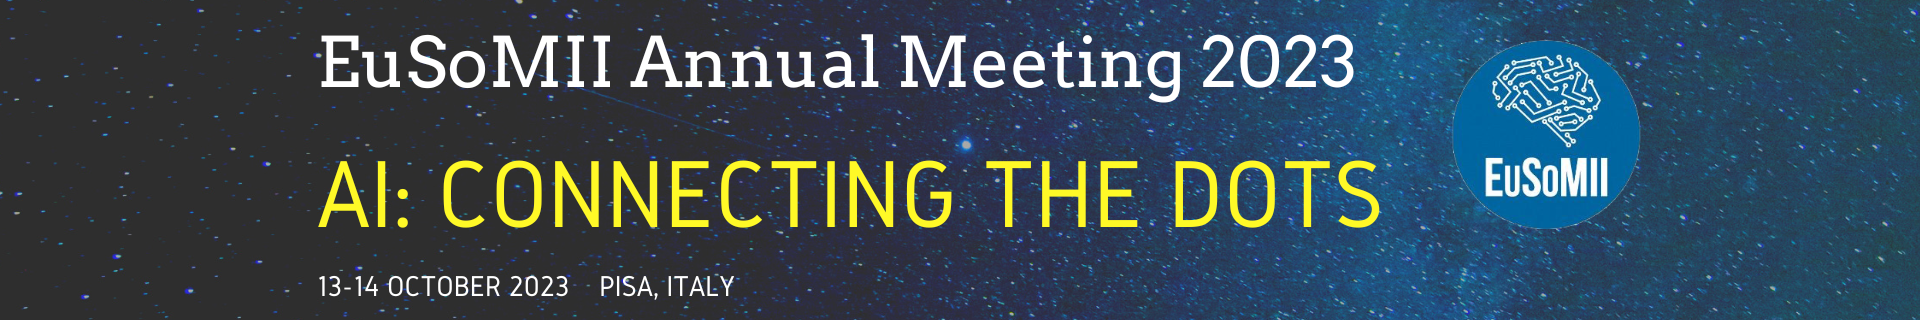 The banner to welcome you to EuSoMII Annual Meeting 2023. AI: Connecting the dots